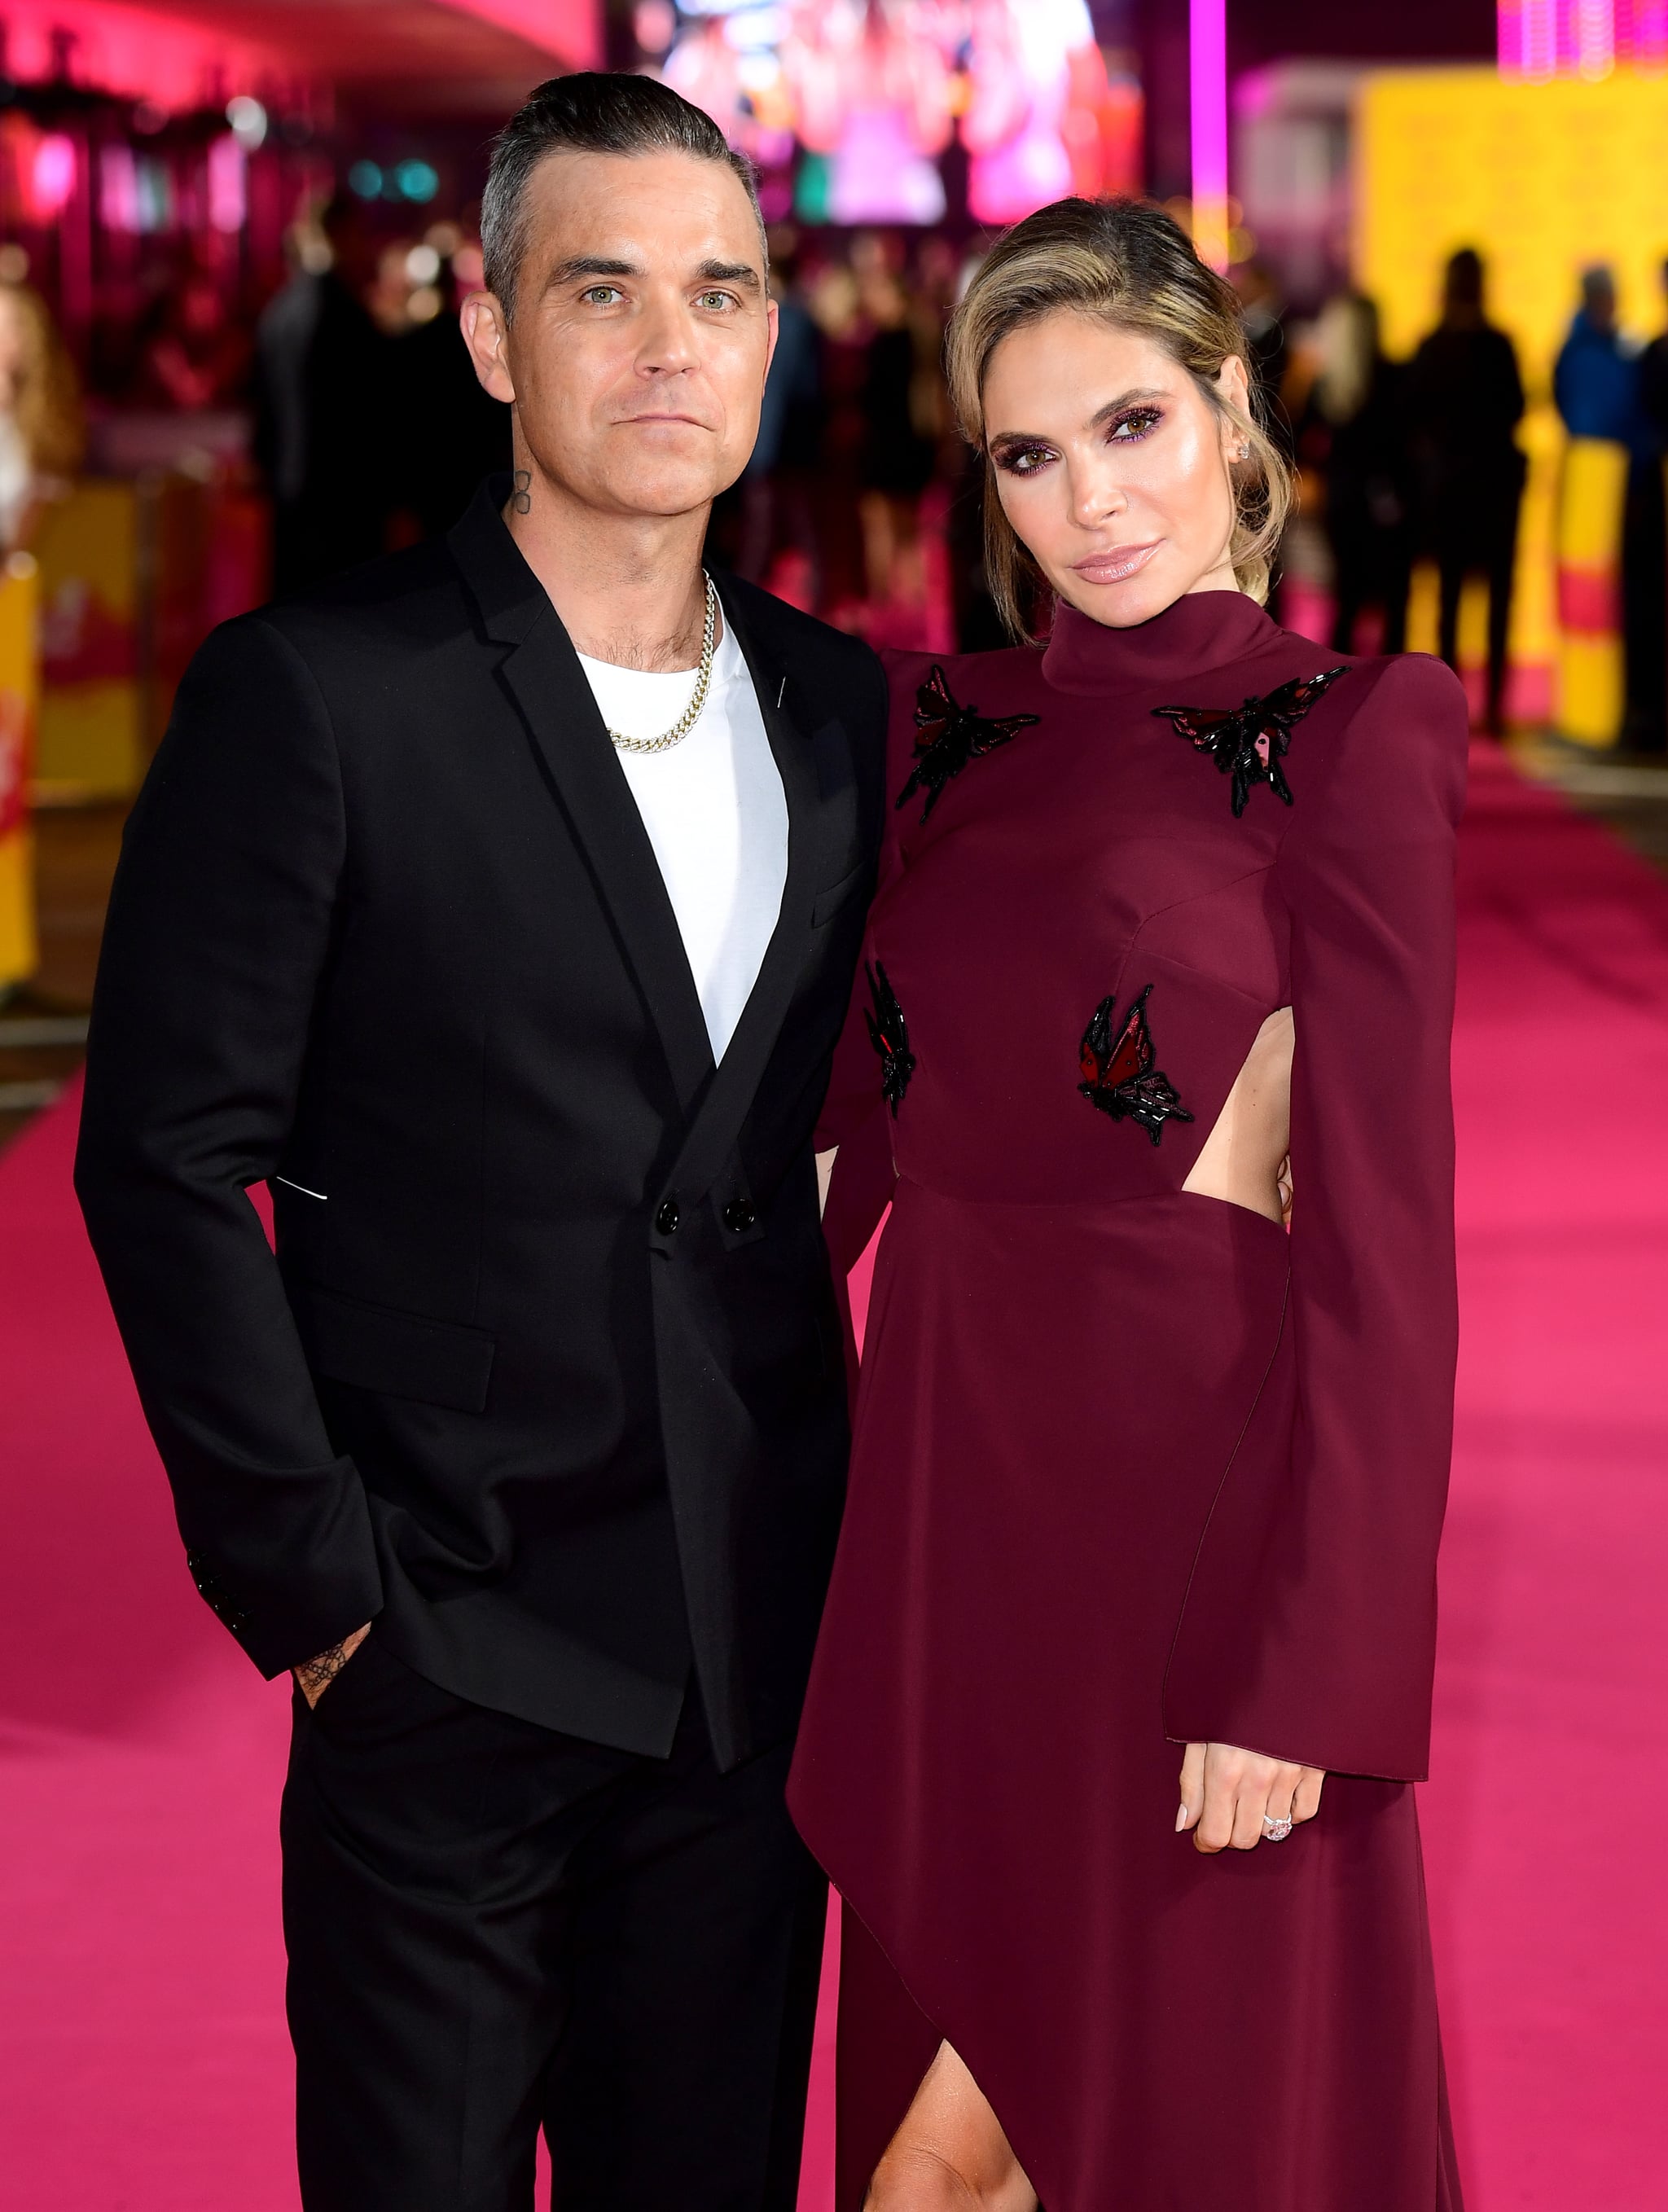 Robbie Williams and Ayda Field attending the ITV Palooza held at the Royal Festival Hall, Southbank Centre, London. (Photo by Ian West/PA Images via Getty Images)